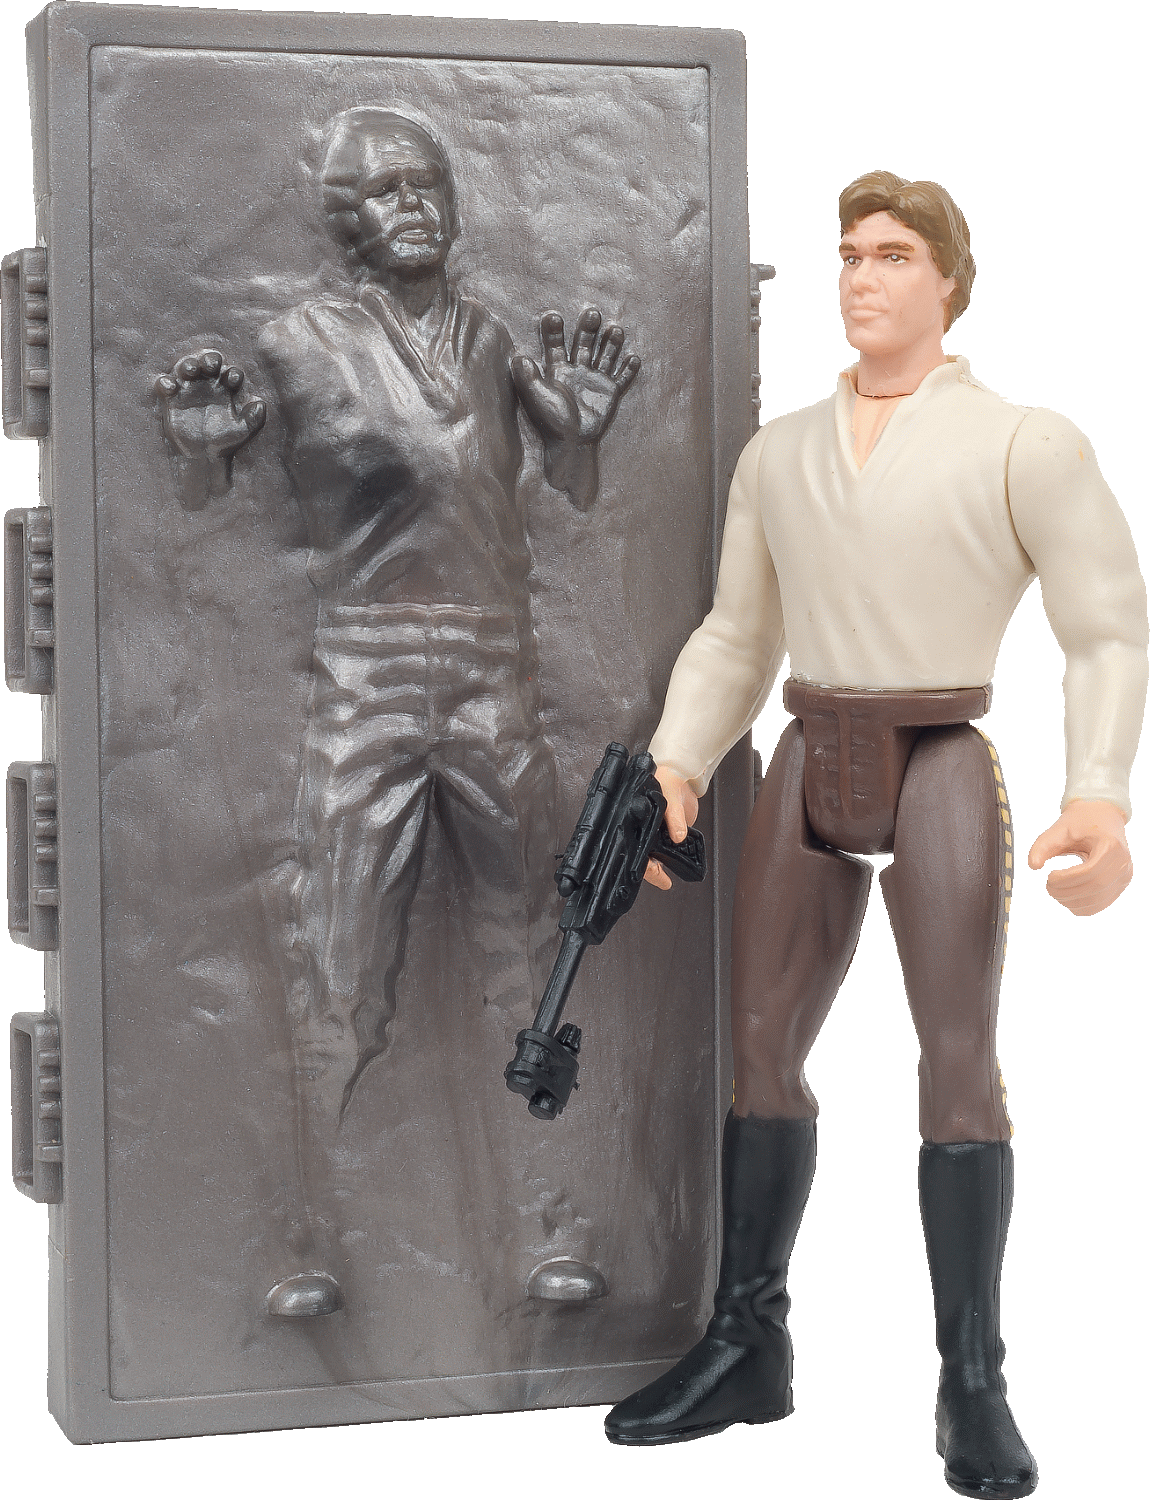 han solo in carbonite action figure